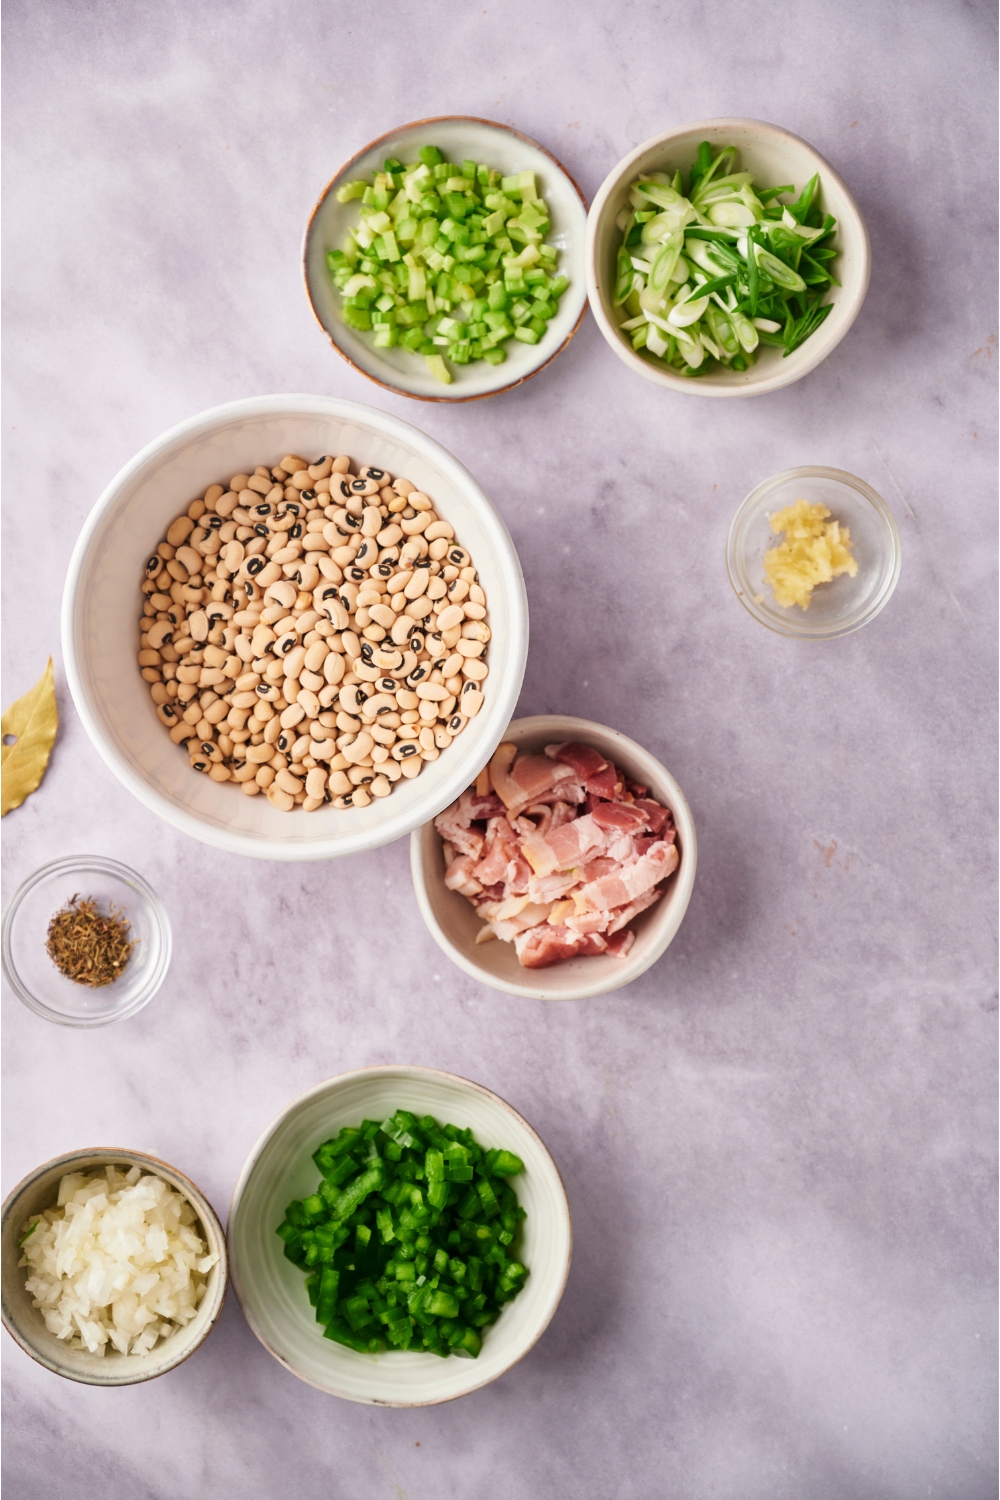 An assortment of ingredients including bowls of black eyed peas, bacon, green onion, peppers, onion, garlic, and herbs.